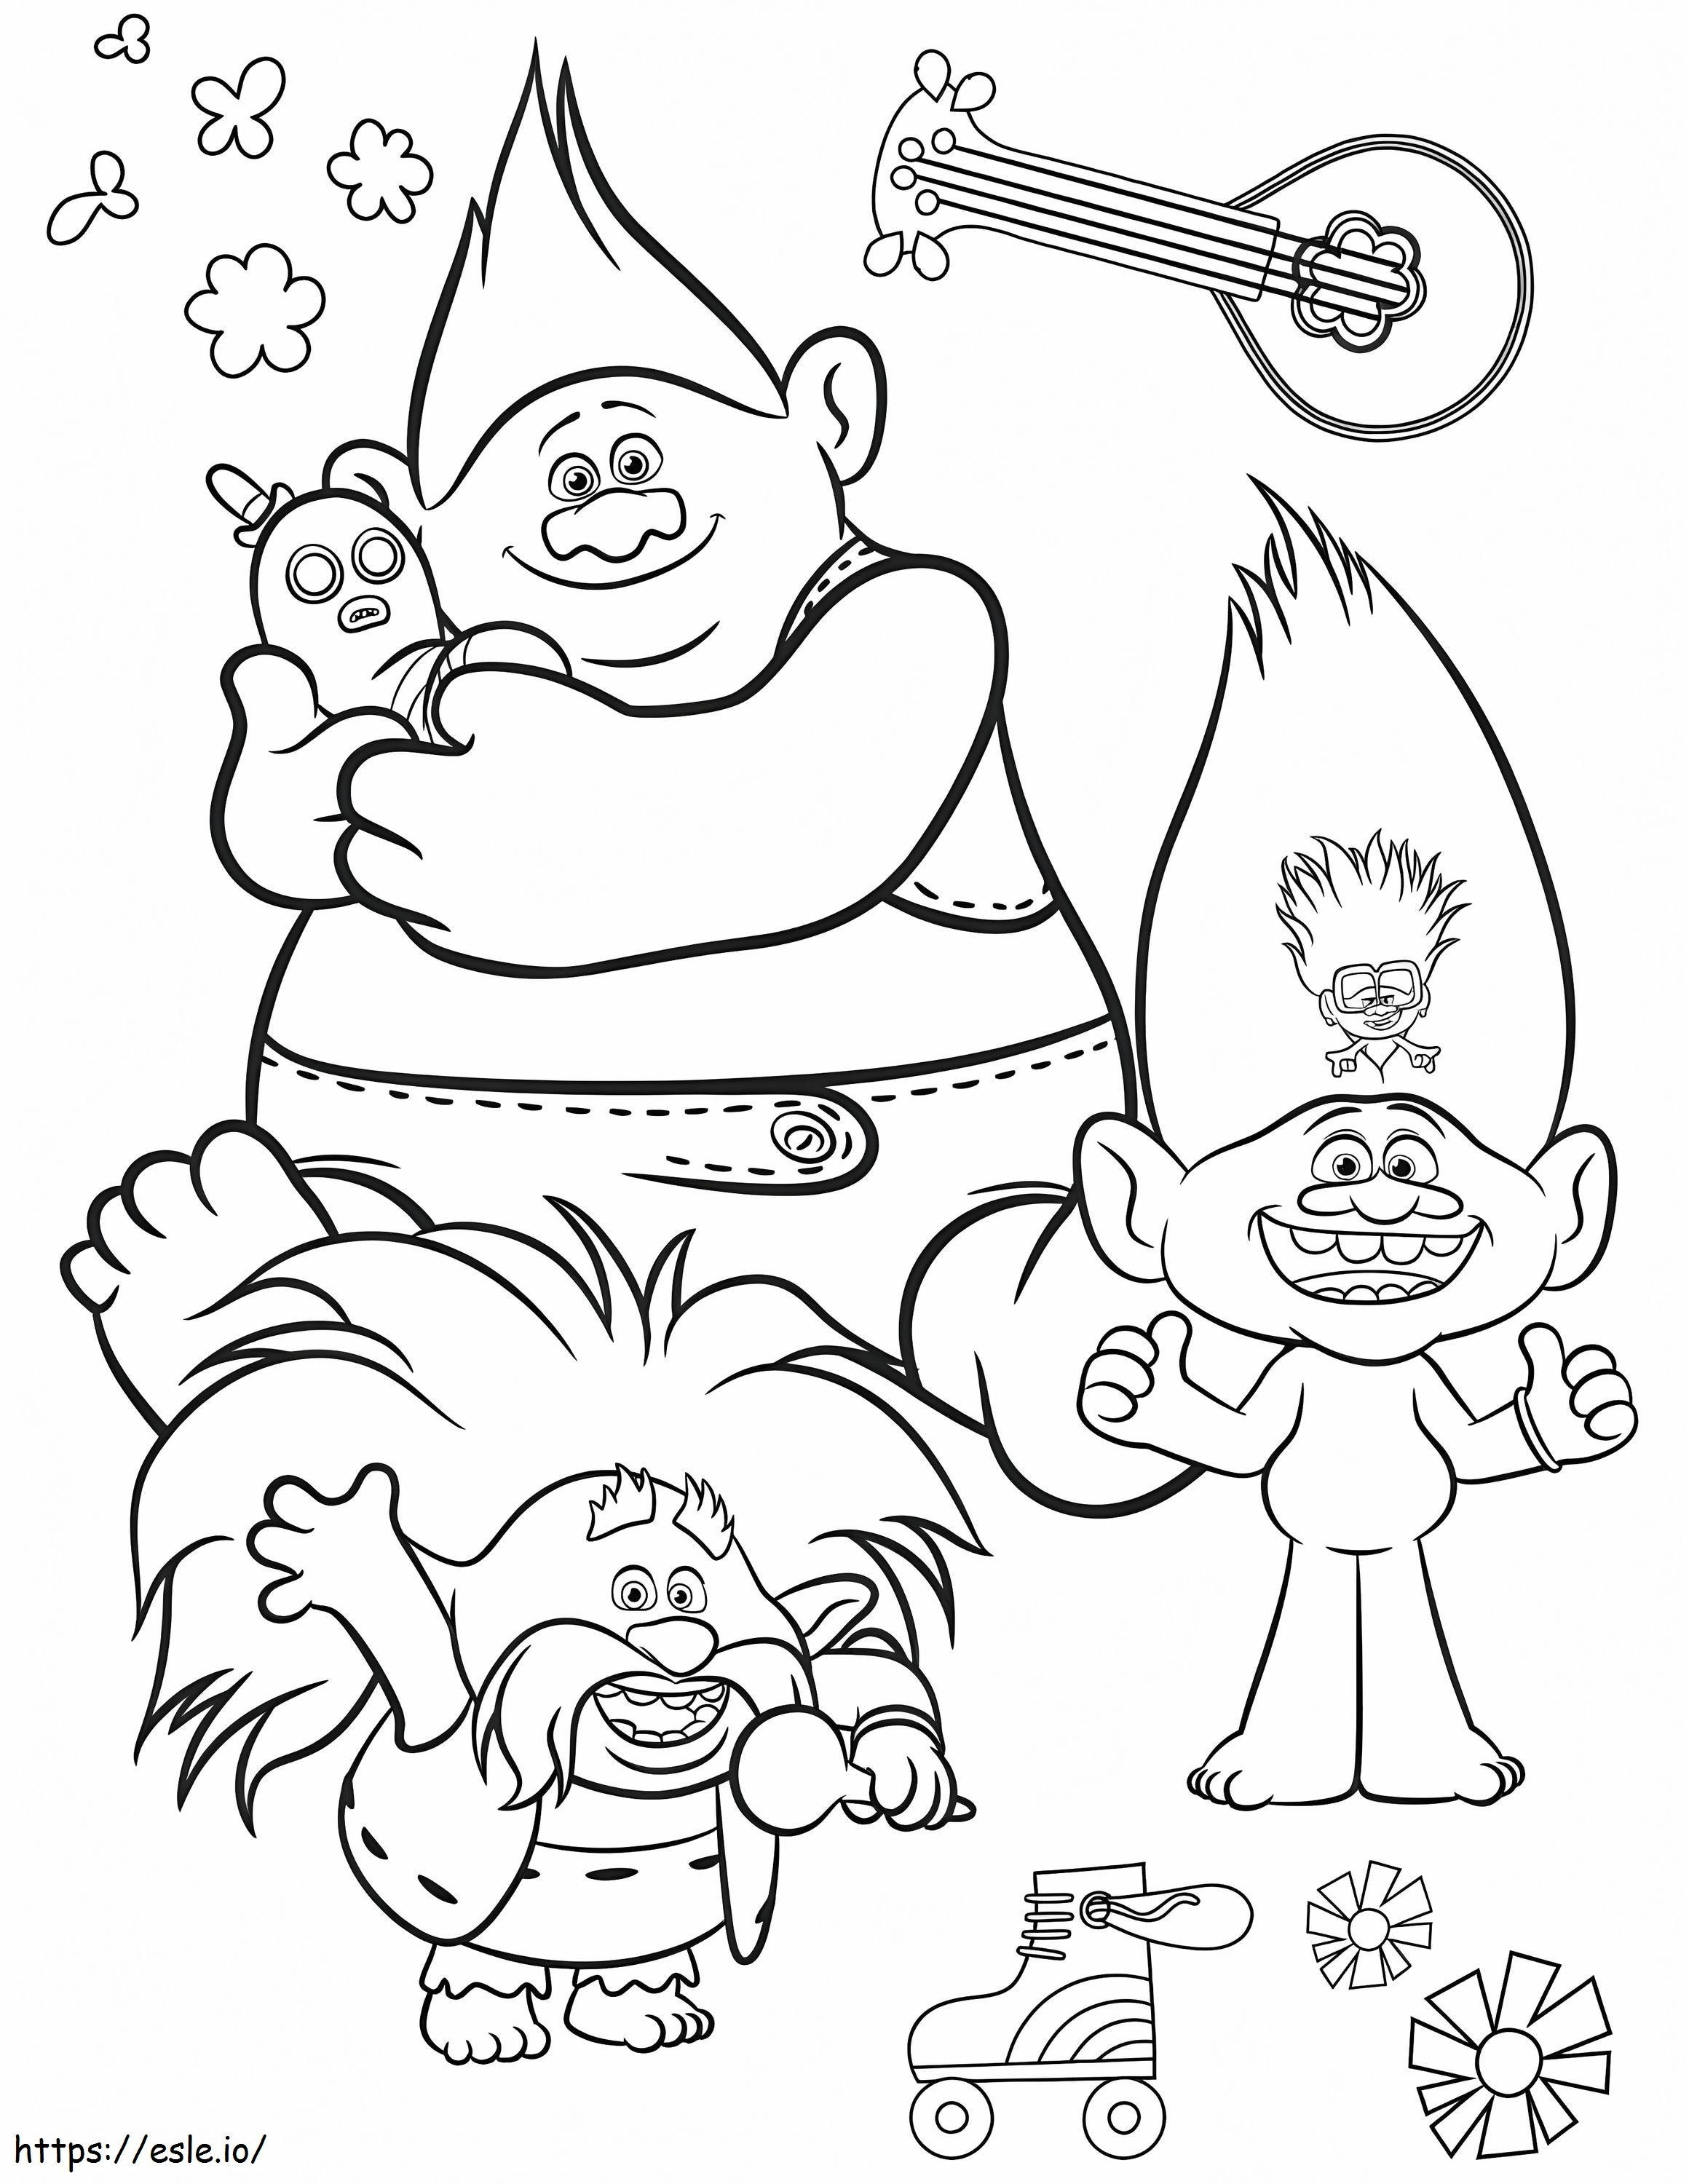 1589510559 Wonder Day Trolls 9 792X1024 1 coloring page